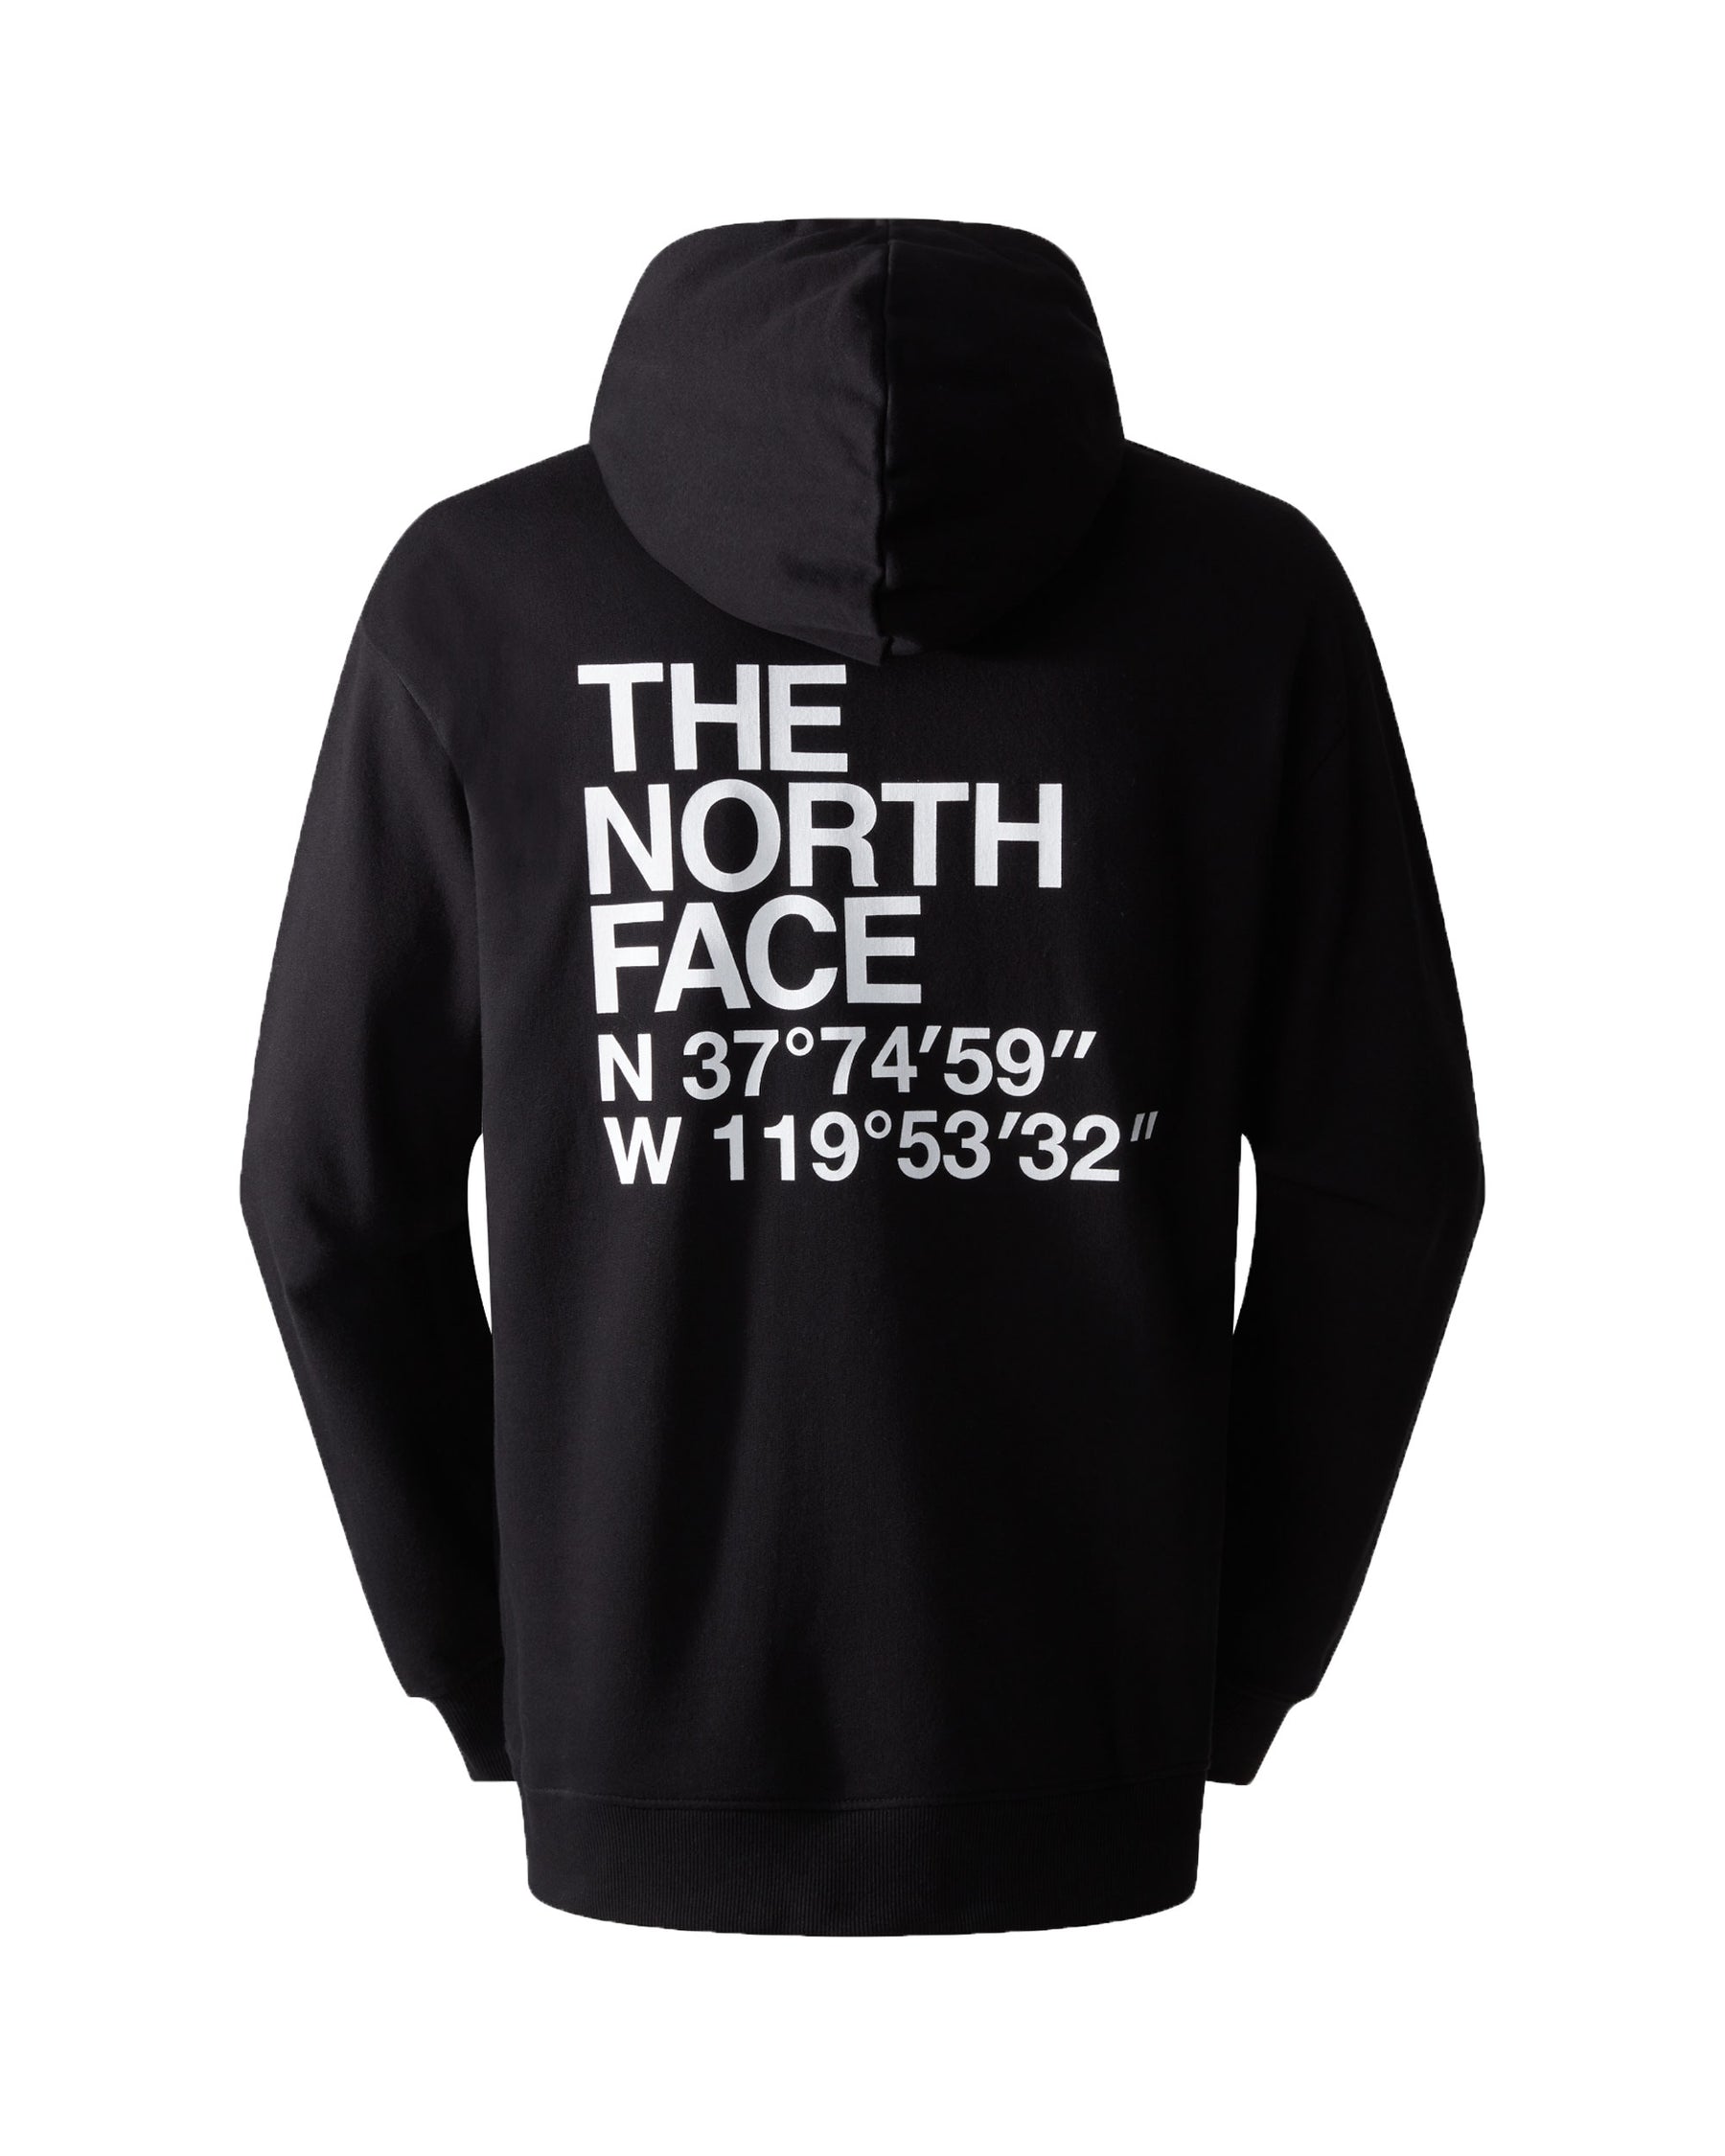 The North Face Coordinates Hoodie Black